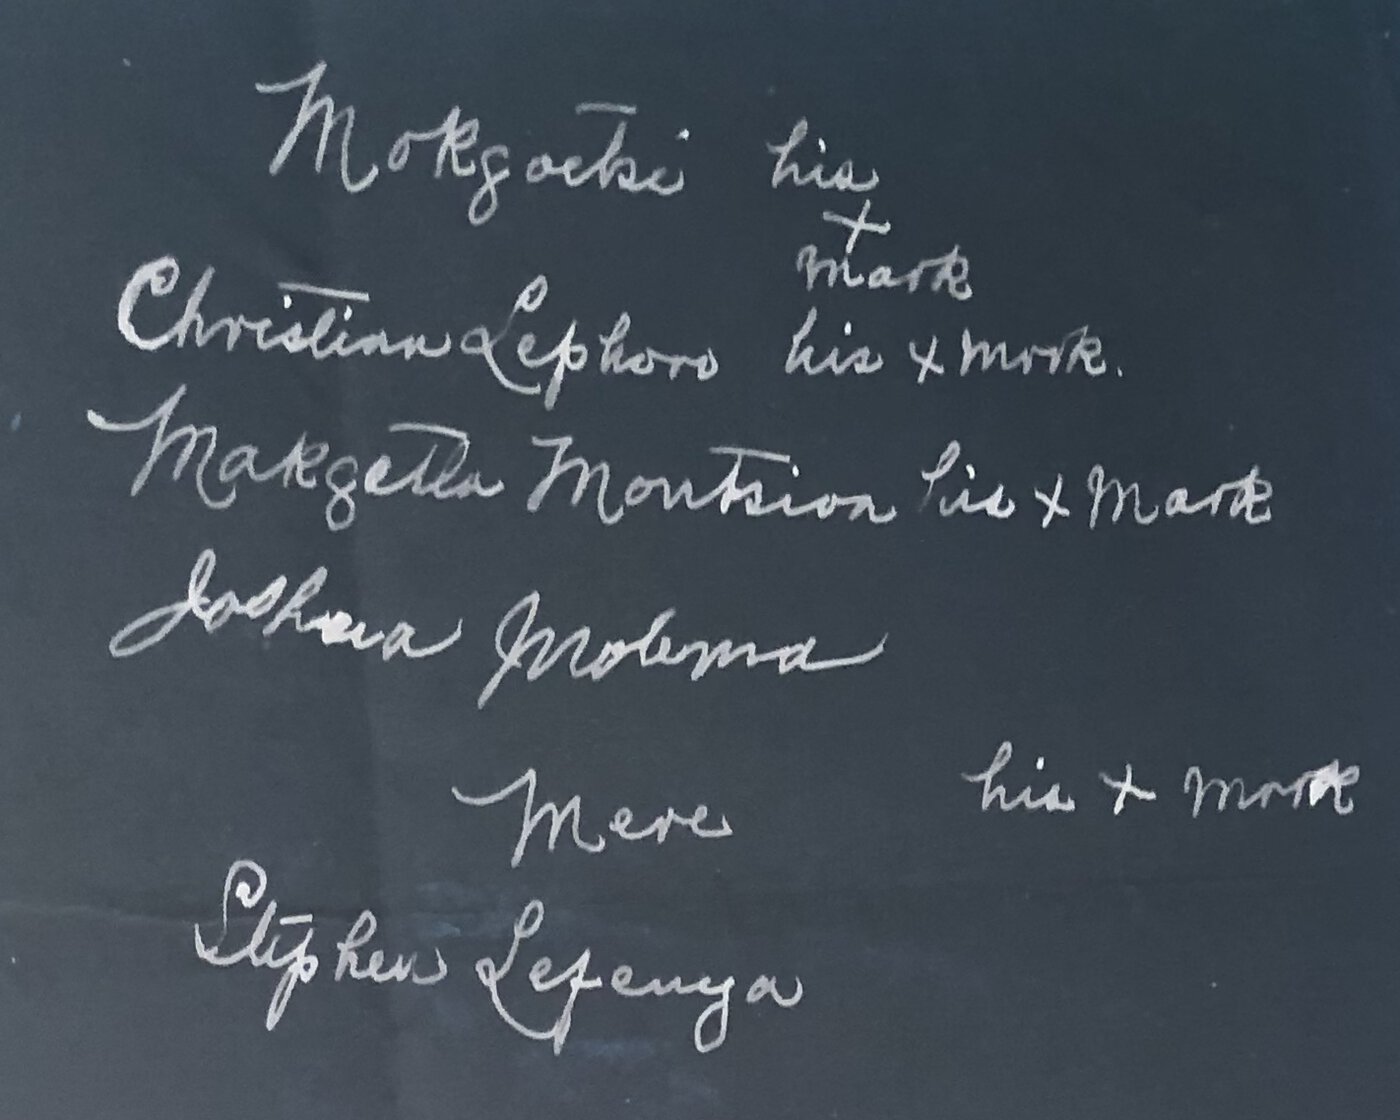 Names of several individuals, some with an “X” beside their name that is labeled as “his mark.”